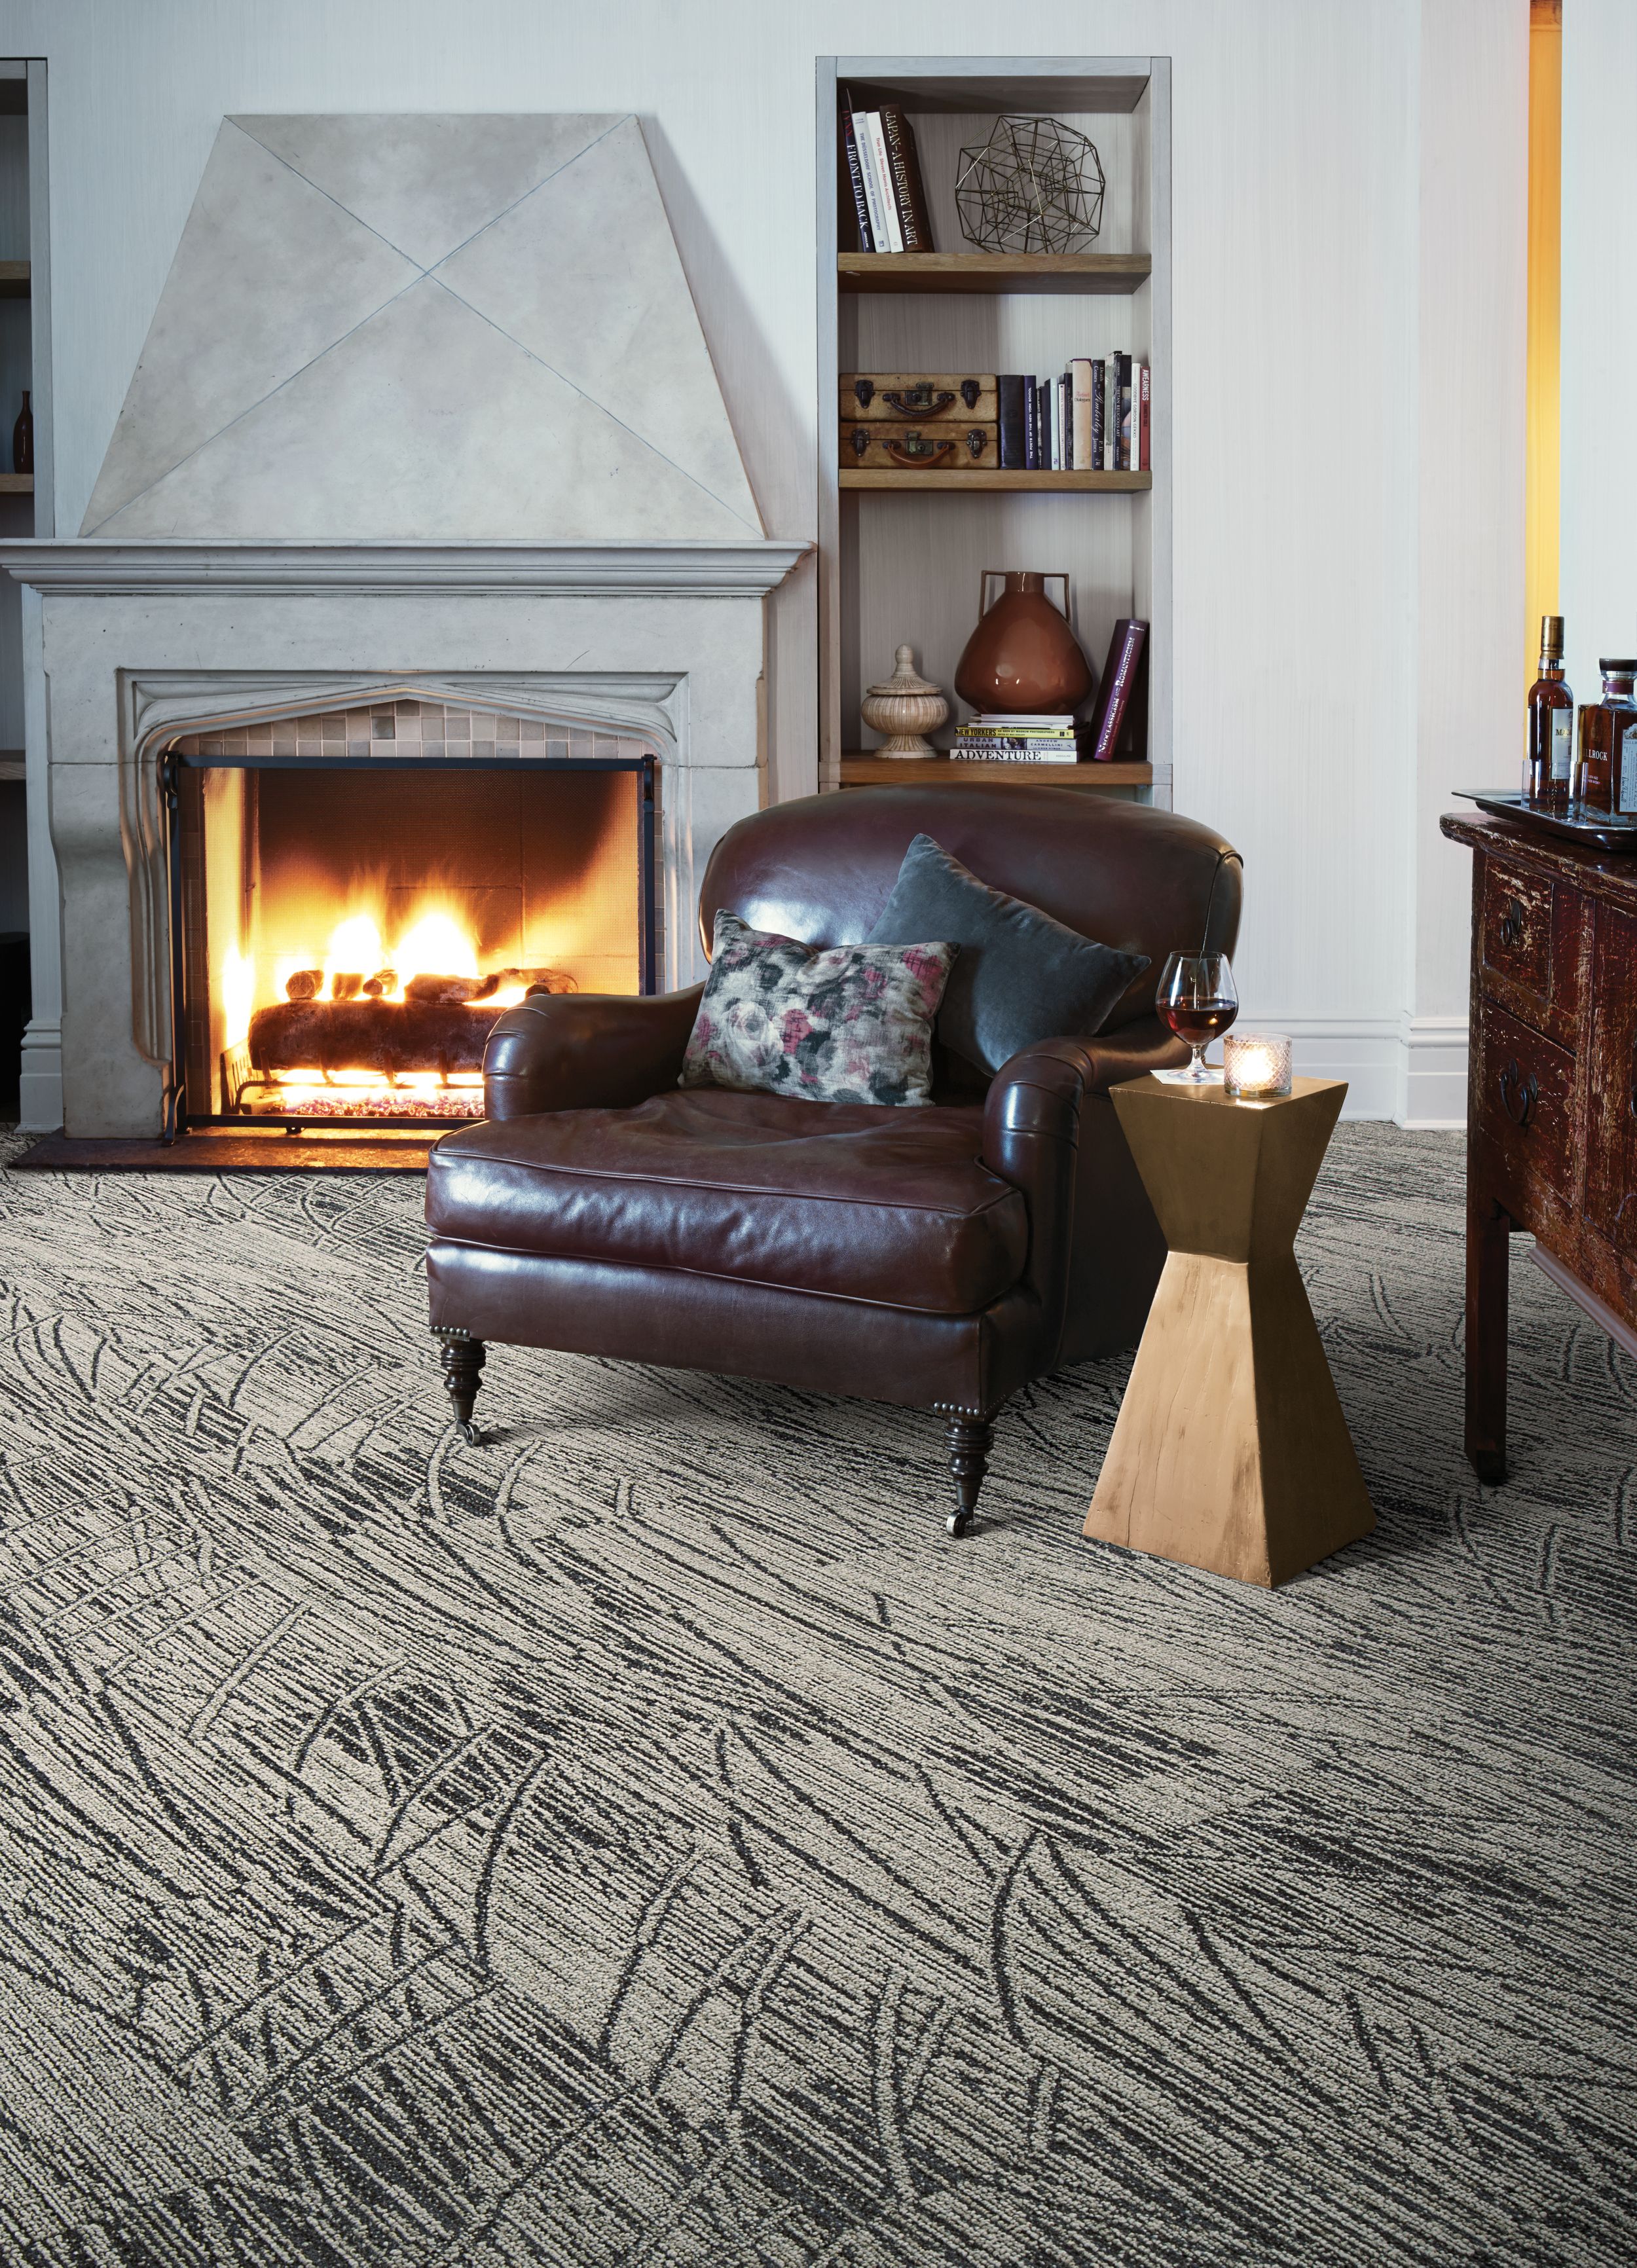 Interface WE152 plank carpet tile in sitting area with fireplace and large leather chair numéro d’image 2